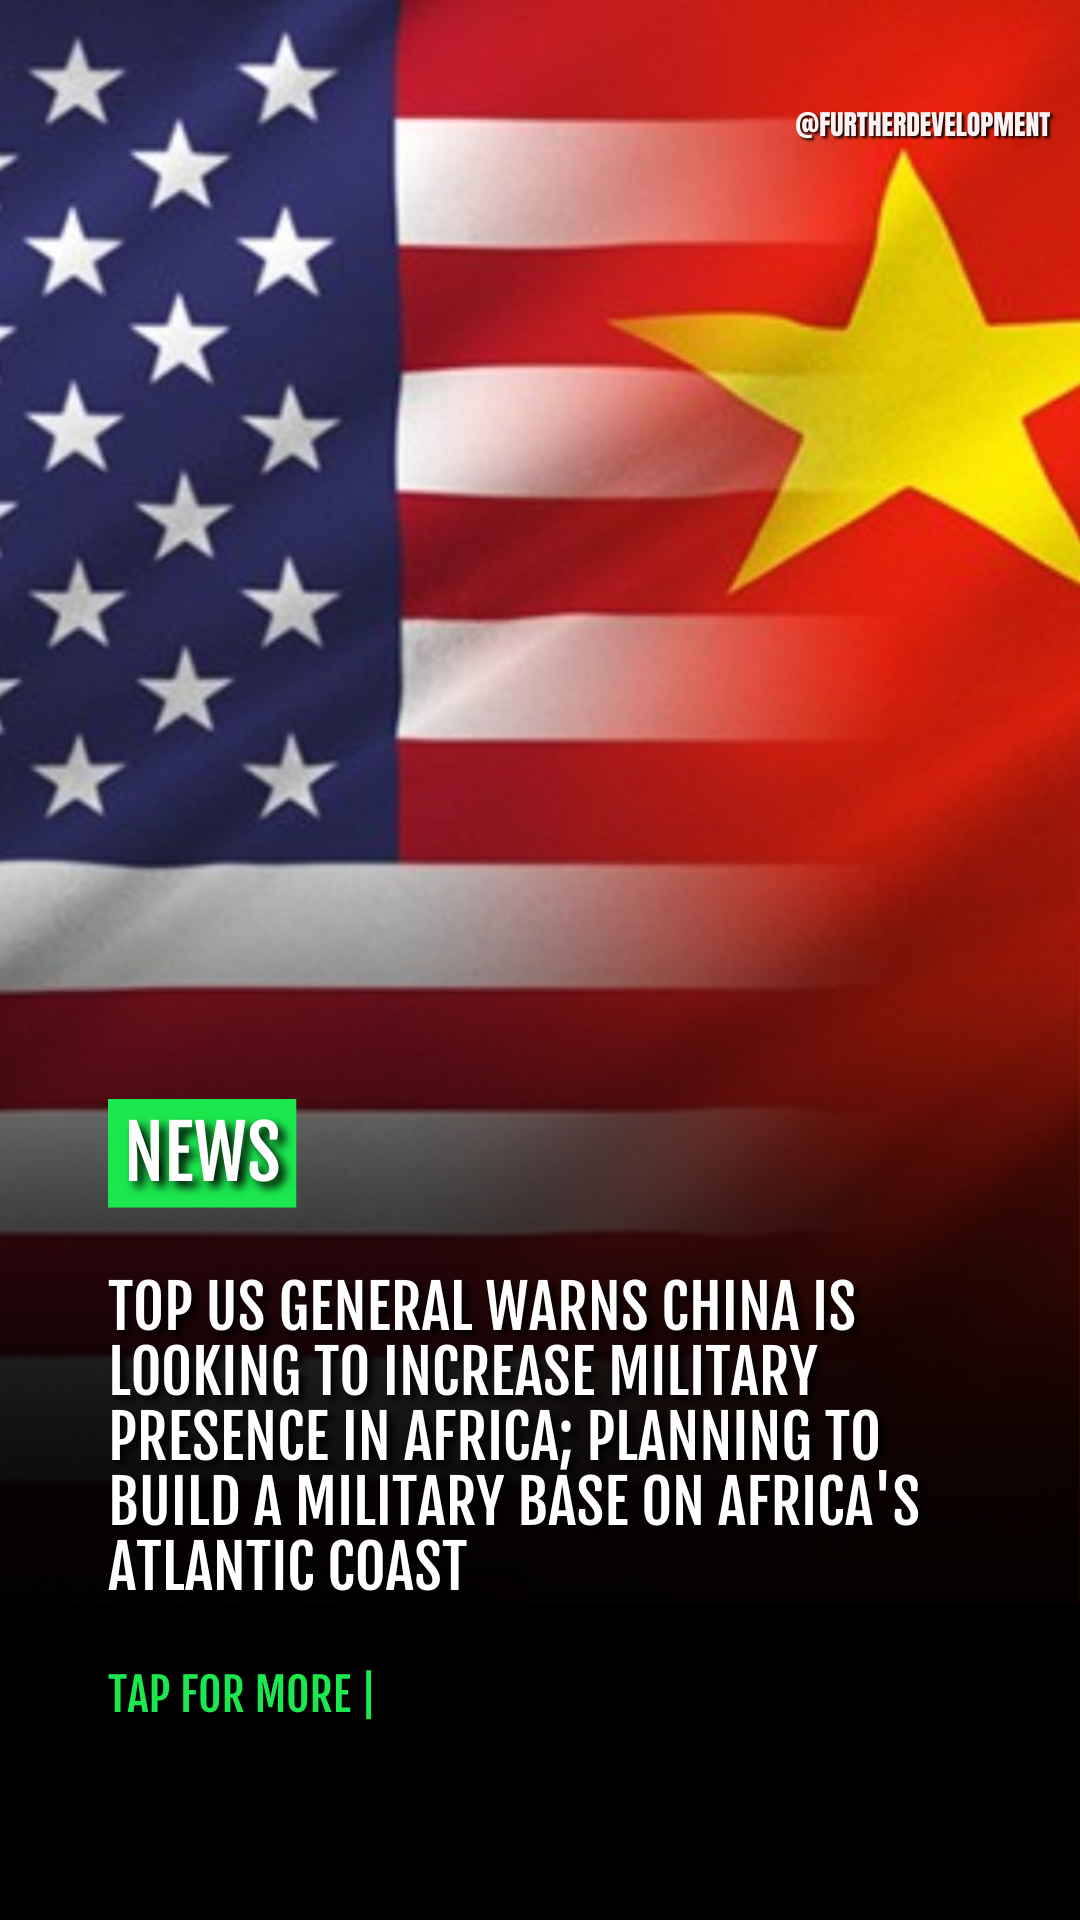 Top US General warns China is looking to increase military presence in Africa; planning to build a military base on Africa's Atlantic coast